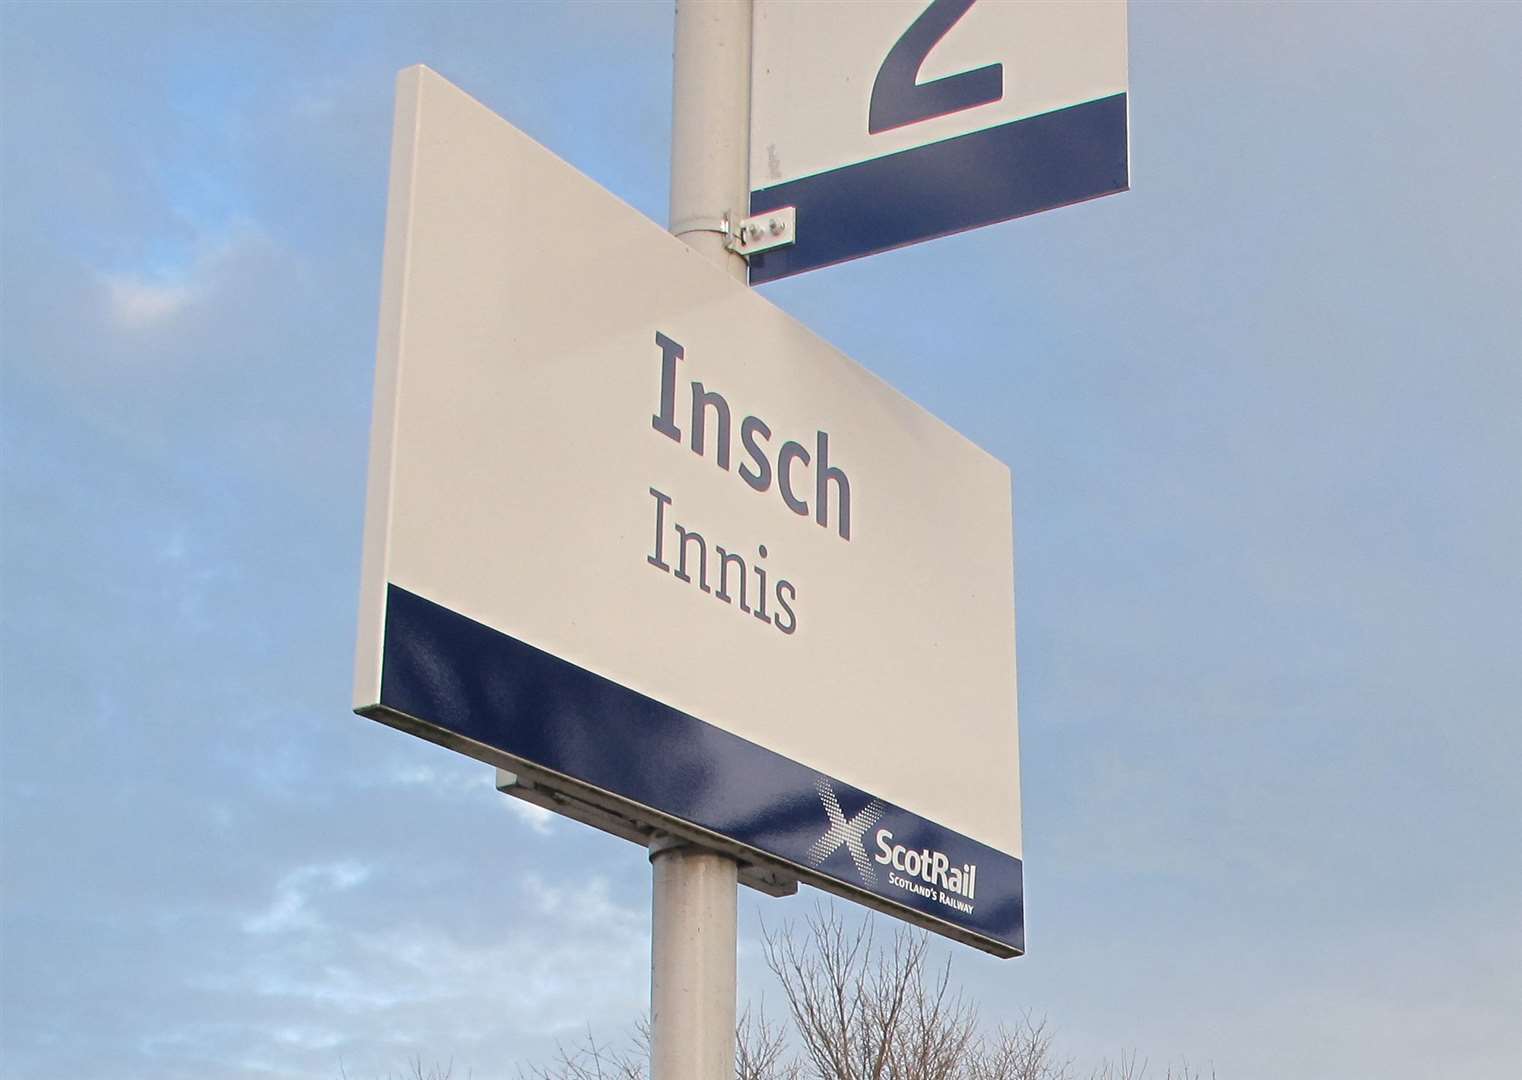 Insch Station's access continues to be rated as some of the worst in Scotland